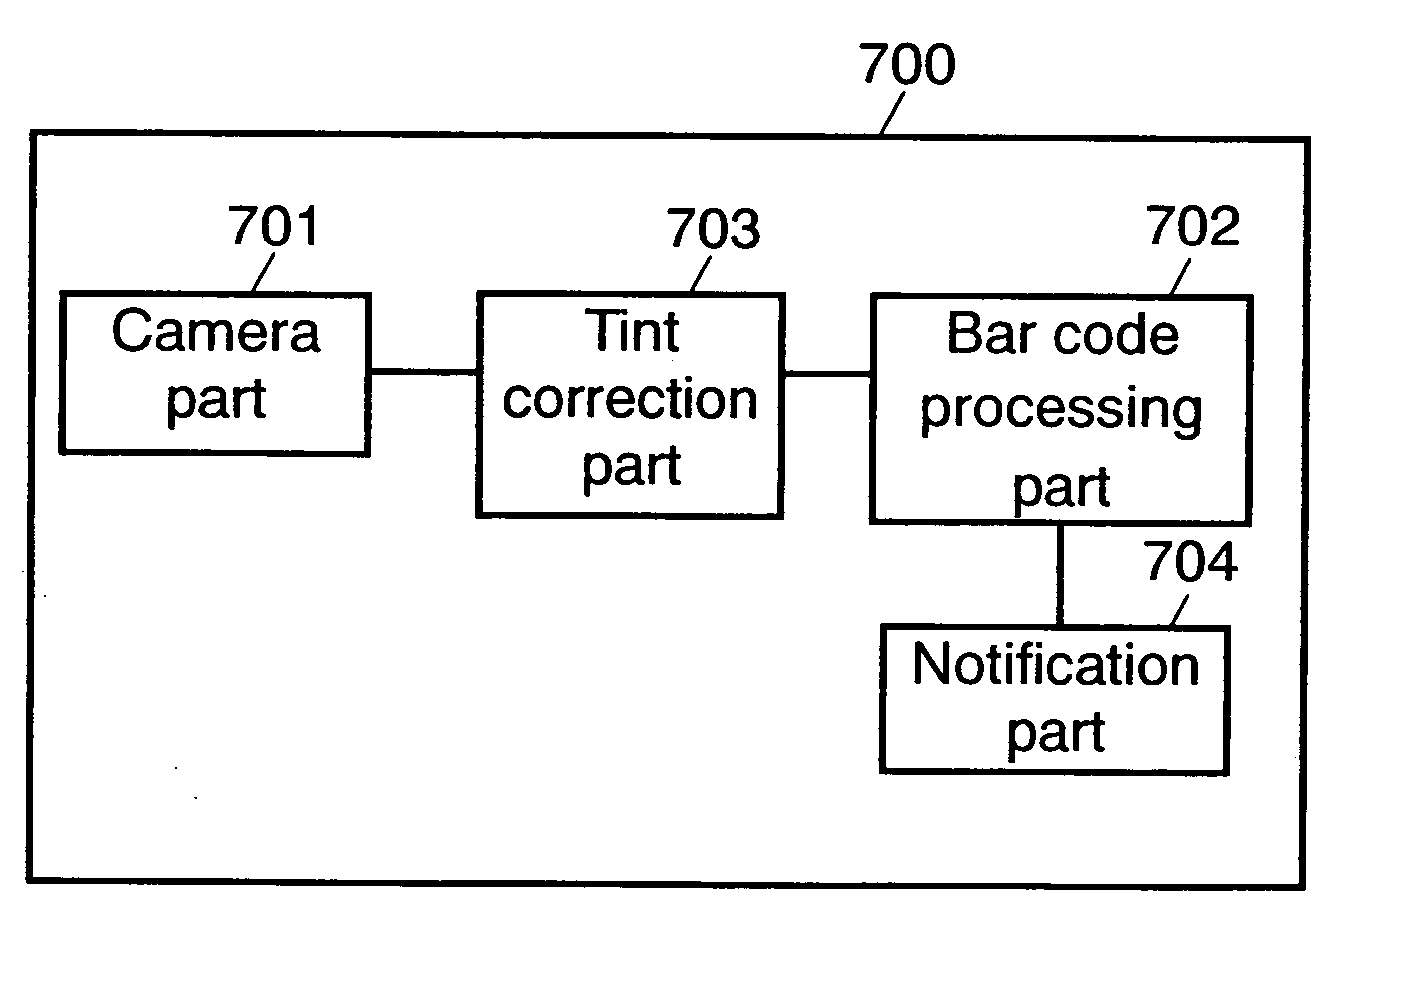 Multicolored two-dimensional barcode, image display apparatus thereof, information terminal apparatus, display method, decoding method, information communication system, and information communication method